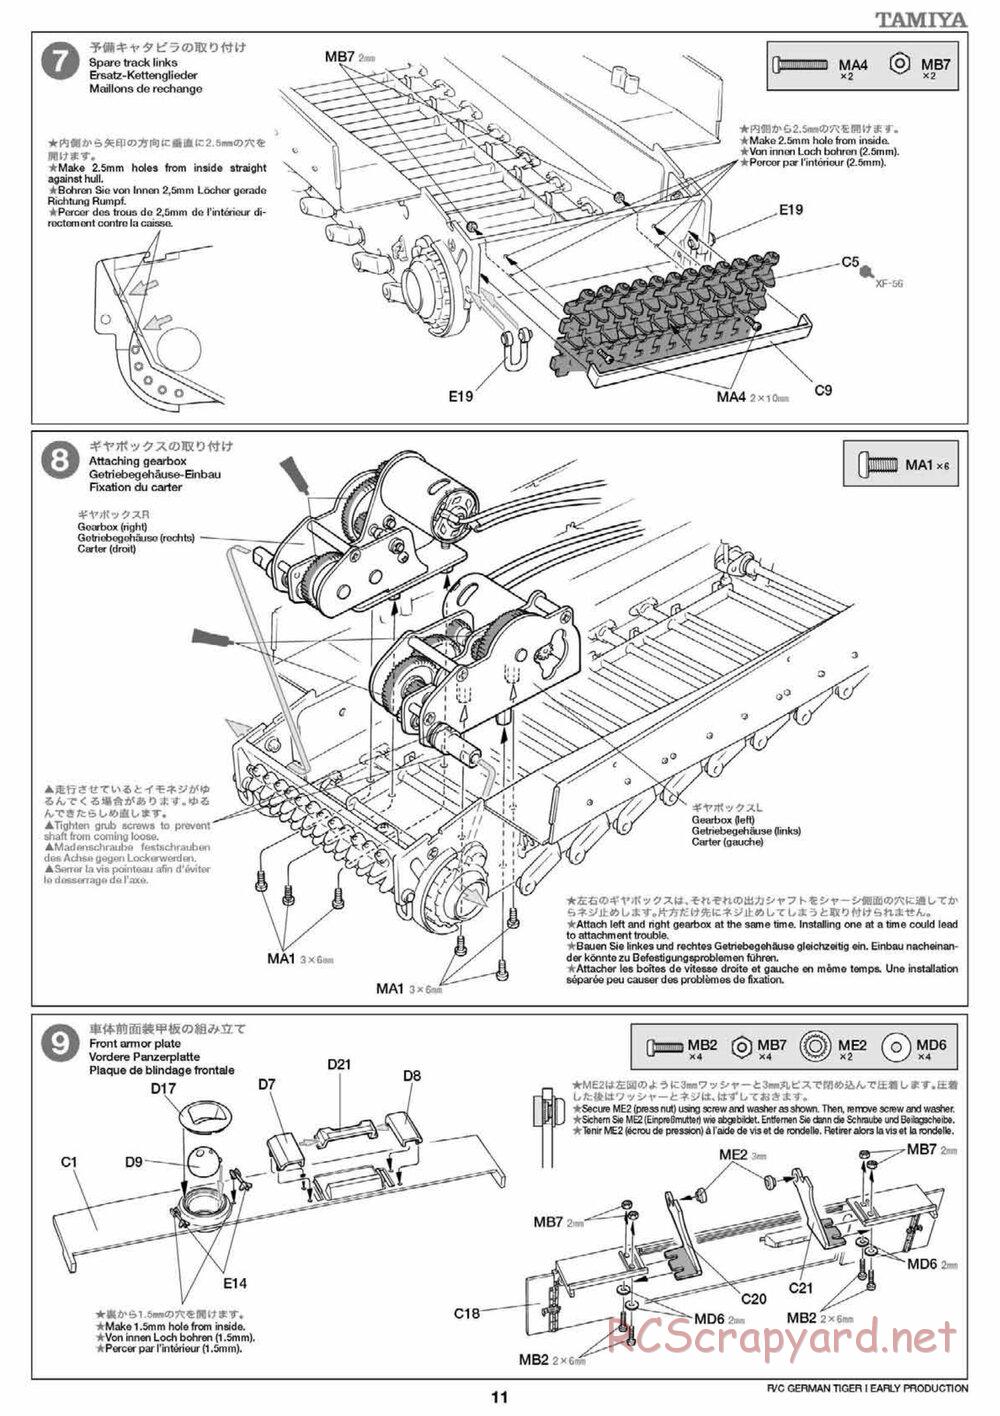 Tamiya - Tiger I Early Production - 1/16 Scale Chassis - Manual - Page 11